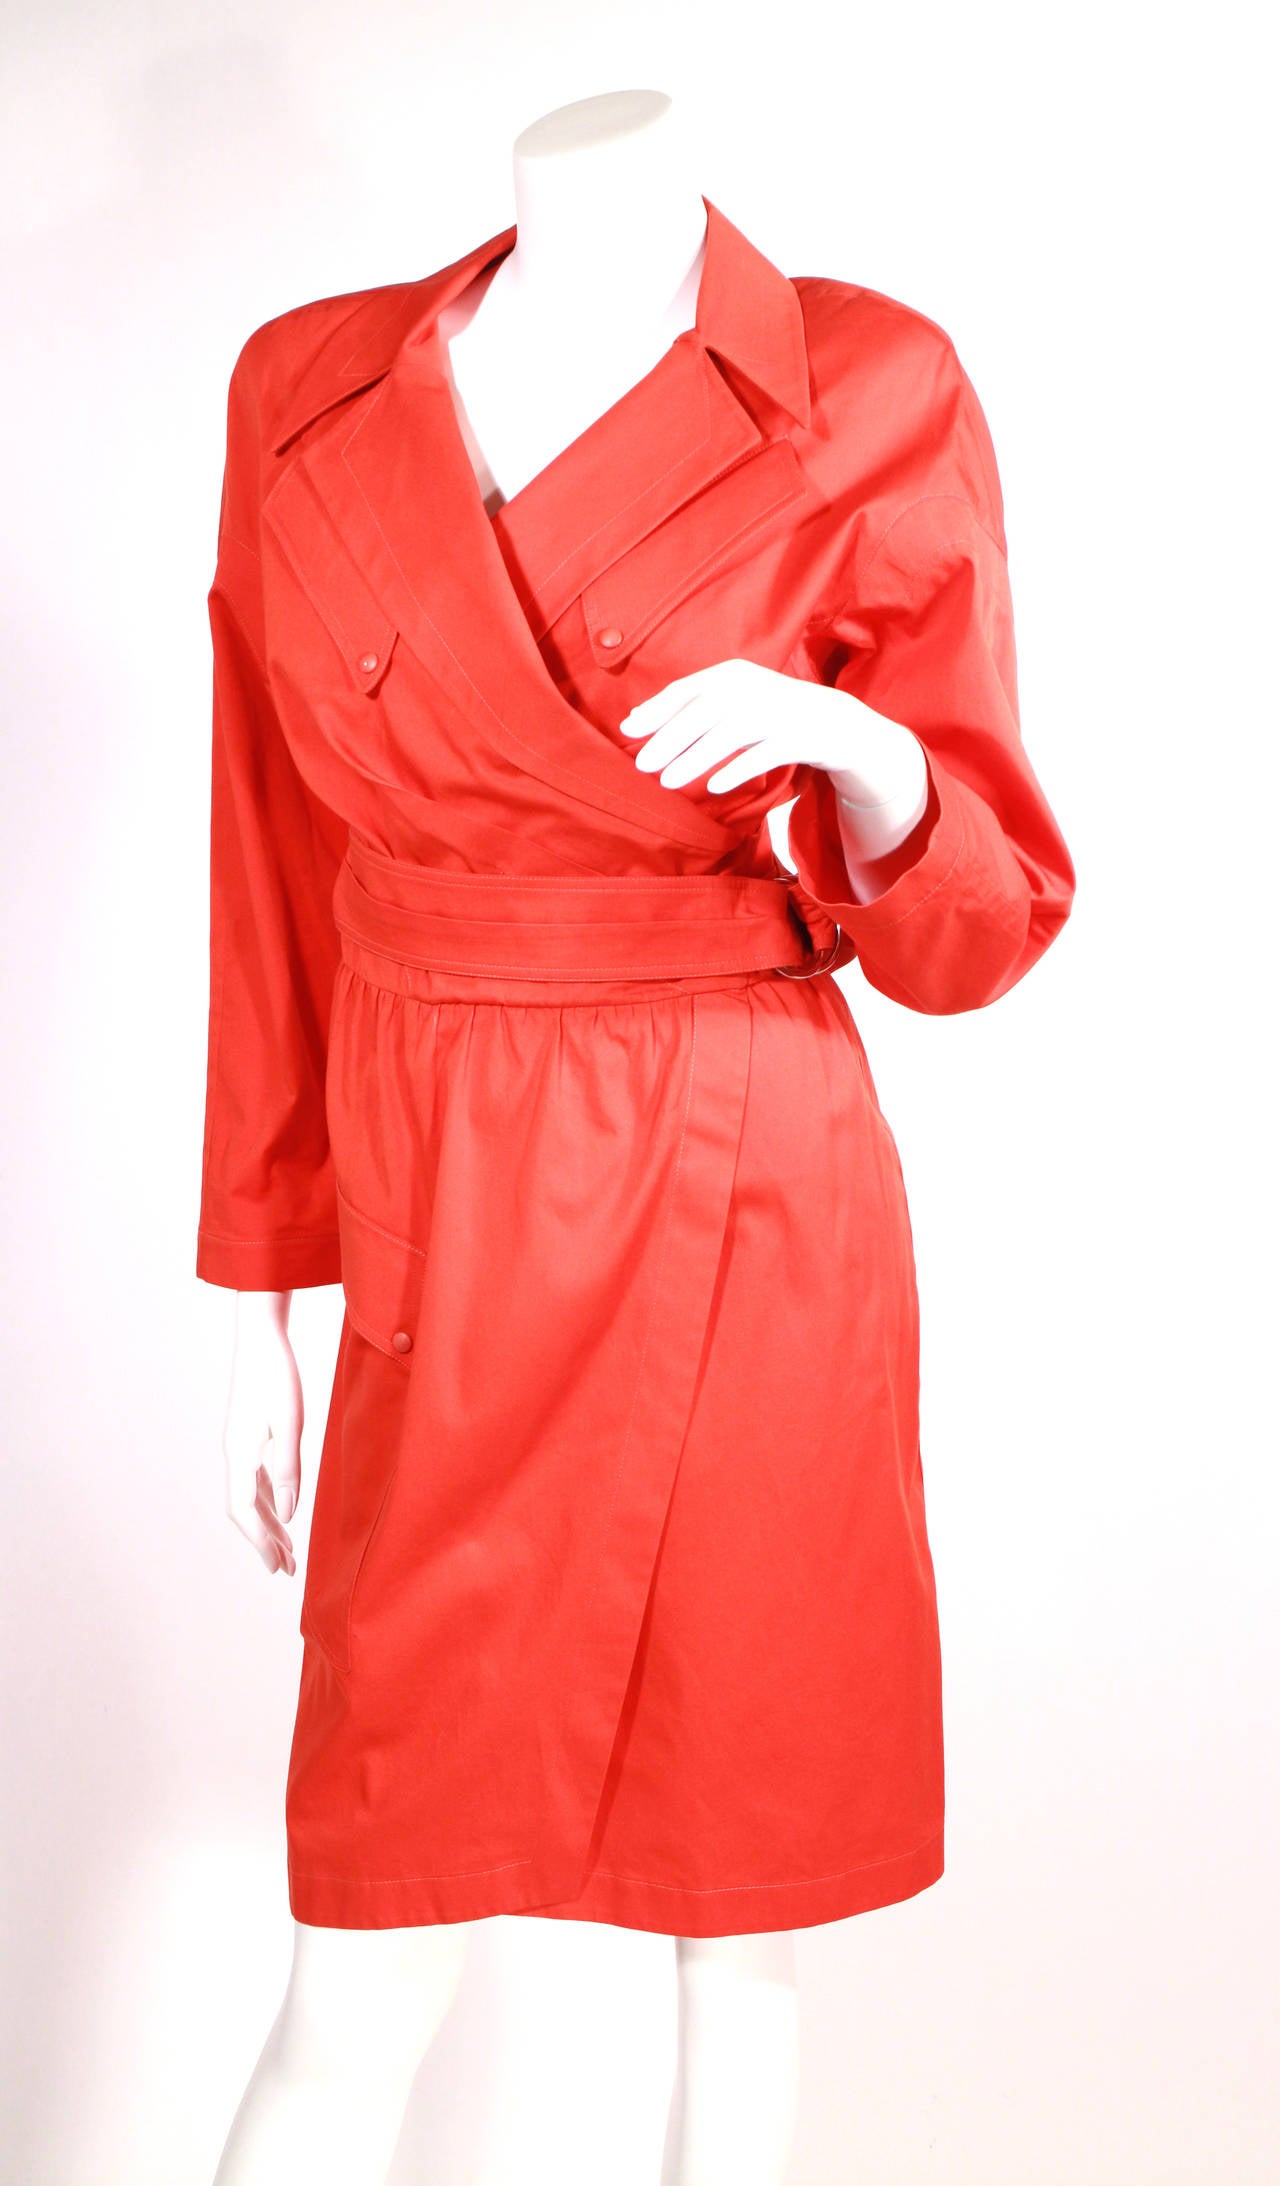 Thierry Mugler red wrap dress. Circa 1980's. Features oversized collar, belt, and shoulder pads. Excellent condition.